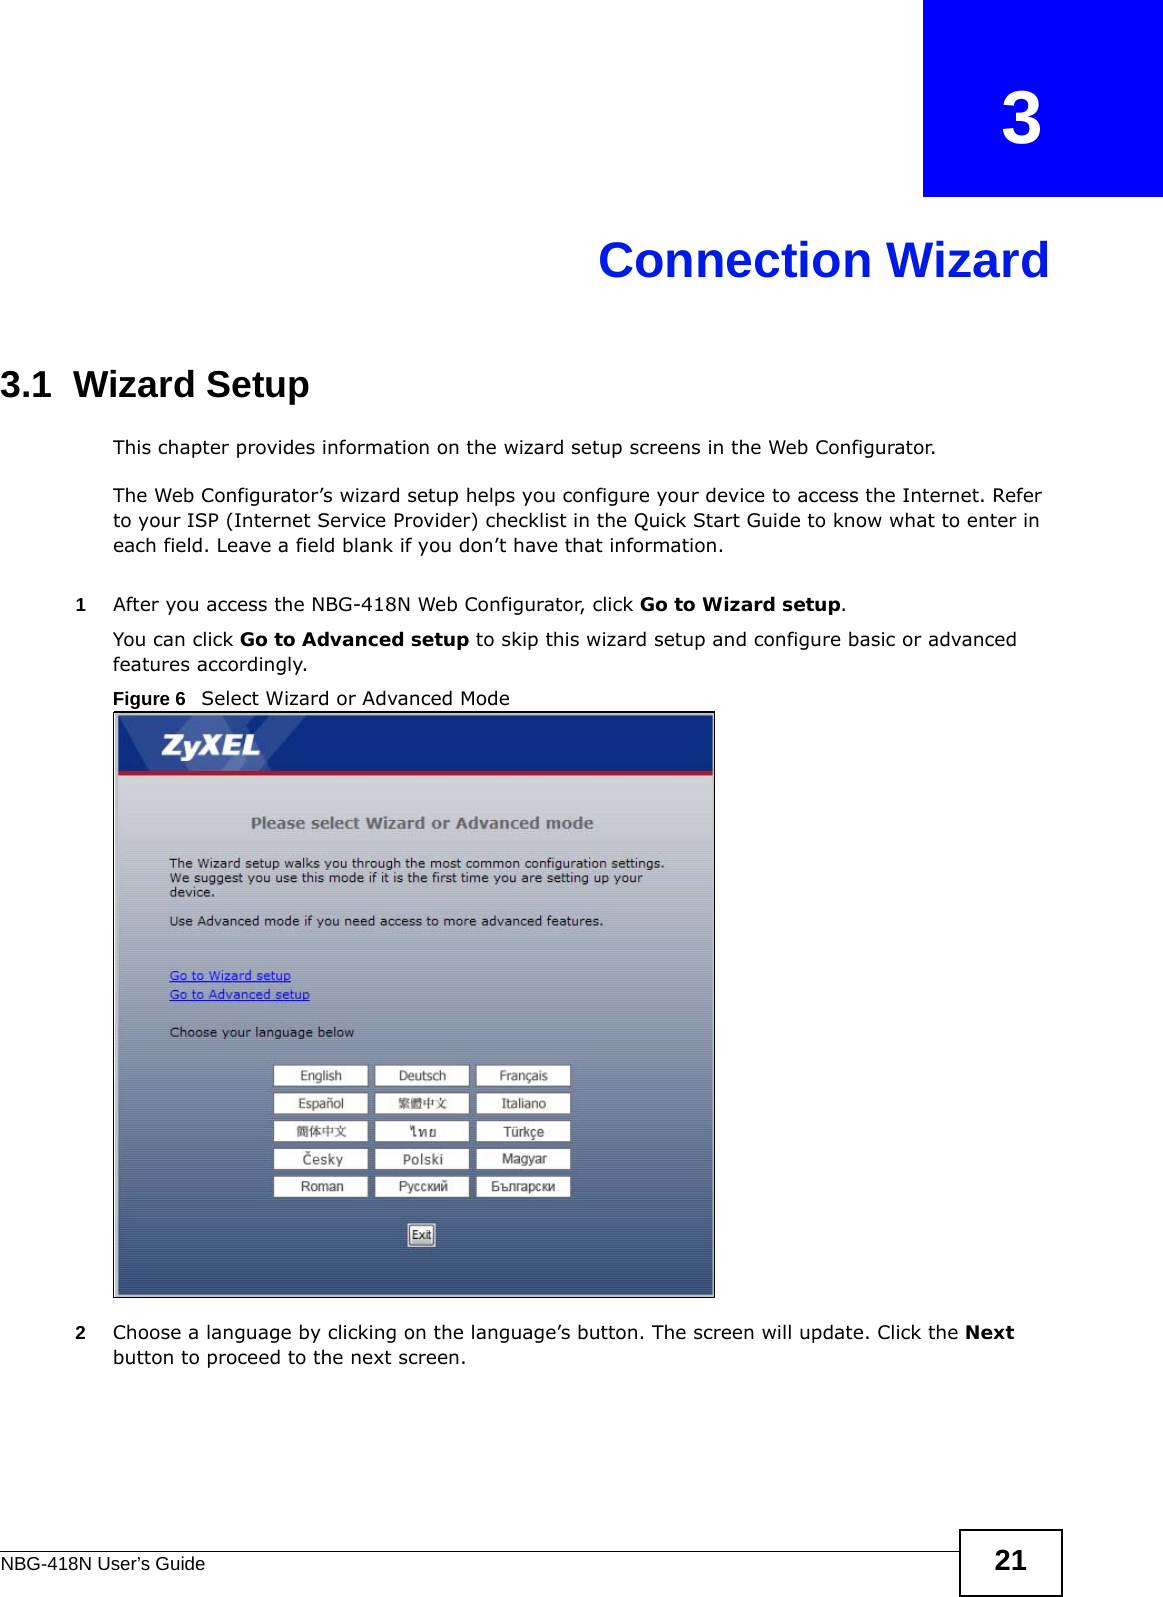 NBG-418N User’s Guide 21CHAPTER   3Connection Wizard3.1  Wizard SetupThis chapter provides information on the wizard setup screens in the Web Configurator.The Web Configurator’s wizard setup helps you configure your device to access the Internet. Refer to your ISP (Internet Service Provider) checklist in the Quick Start Guide to know what to enter in each field. Leave a field blank if you don’t have that information.1After you access the NBG-418N Web Configurator, click Go to Wizard setup.You can click Go to Advanced setup to skip this wizard setup and configure basic or advanced features accordingly.Figure 6   Select Wizard or Advanced Mode2Choose a language by clicking on the language’s button. The screen will update. Click the Next button to proceed to the next screen.